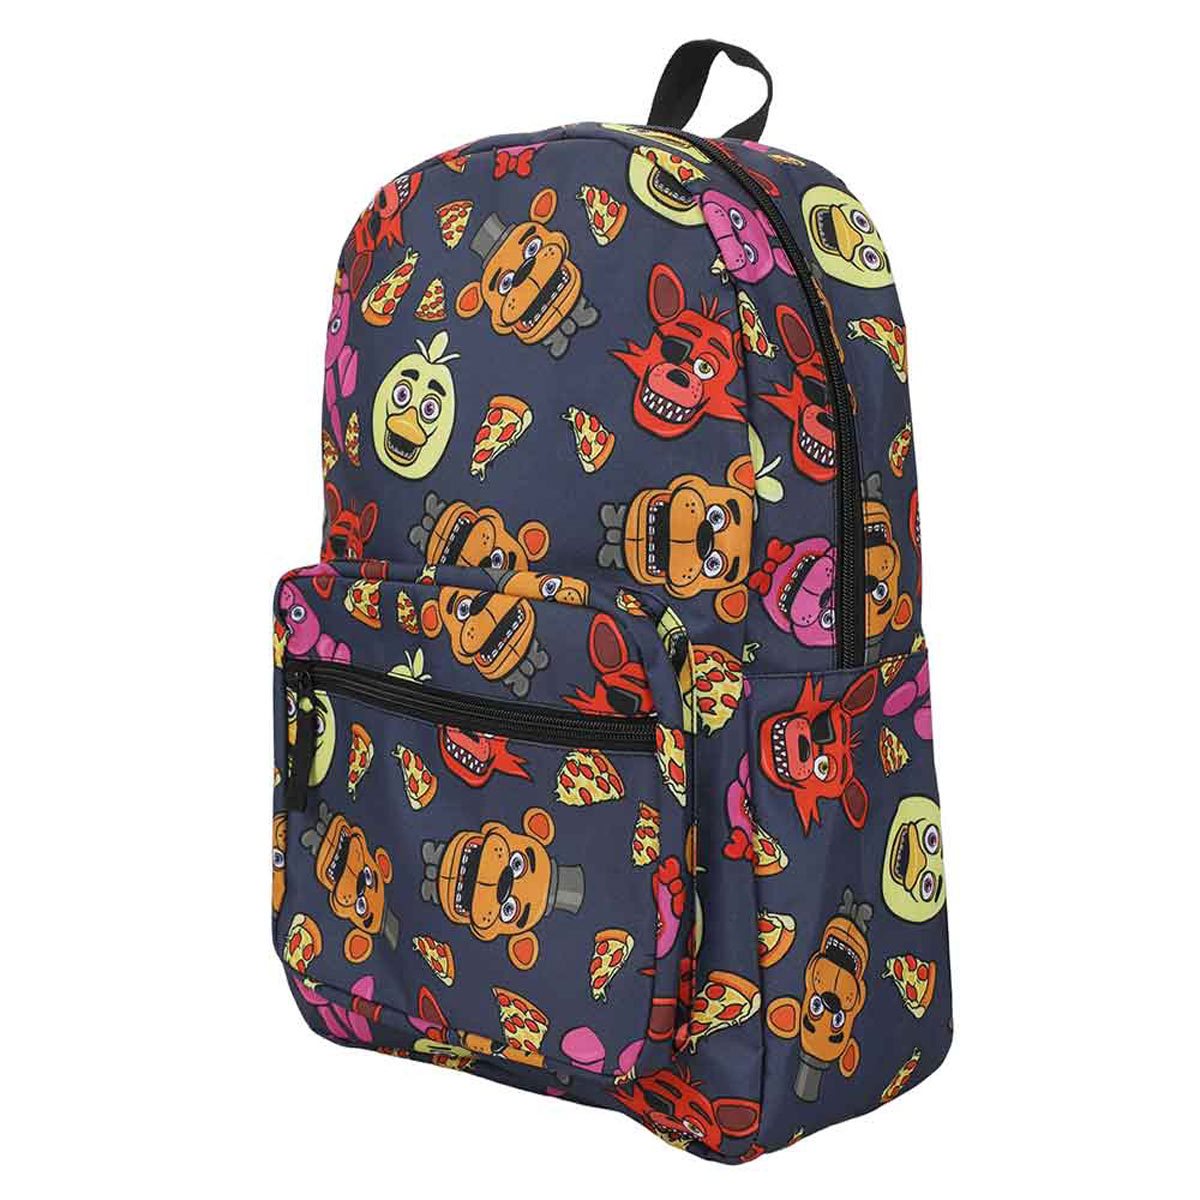 Five Nights at Freddy's Backpack 5-Piece Set